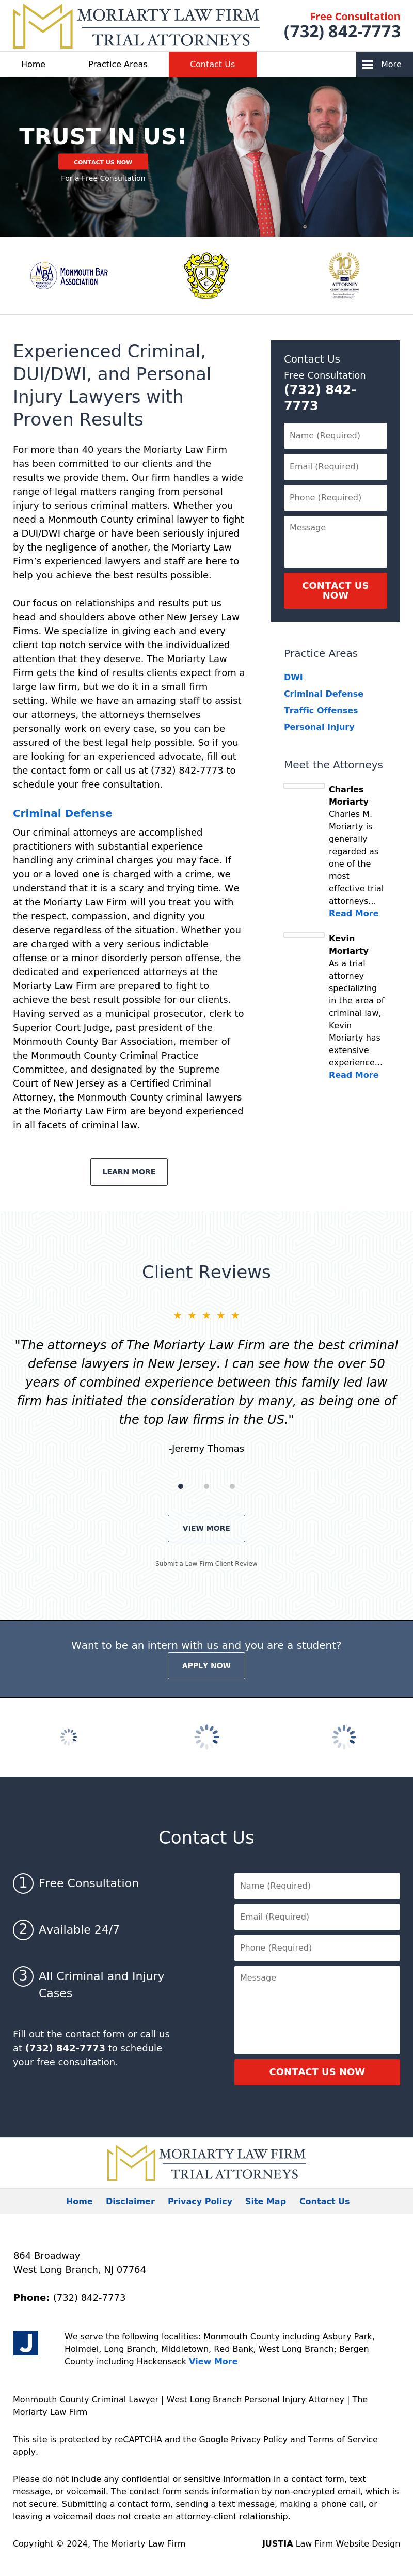 The Moriarty Law Firm - West Long Branch NJ Lawyers